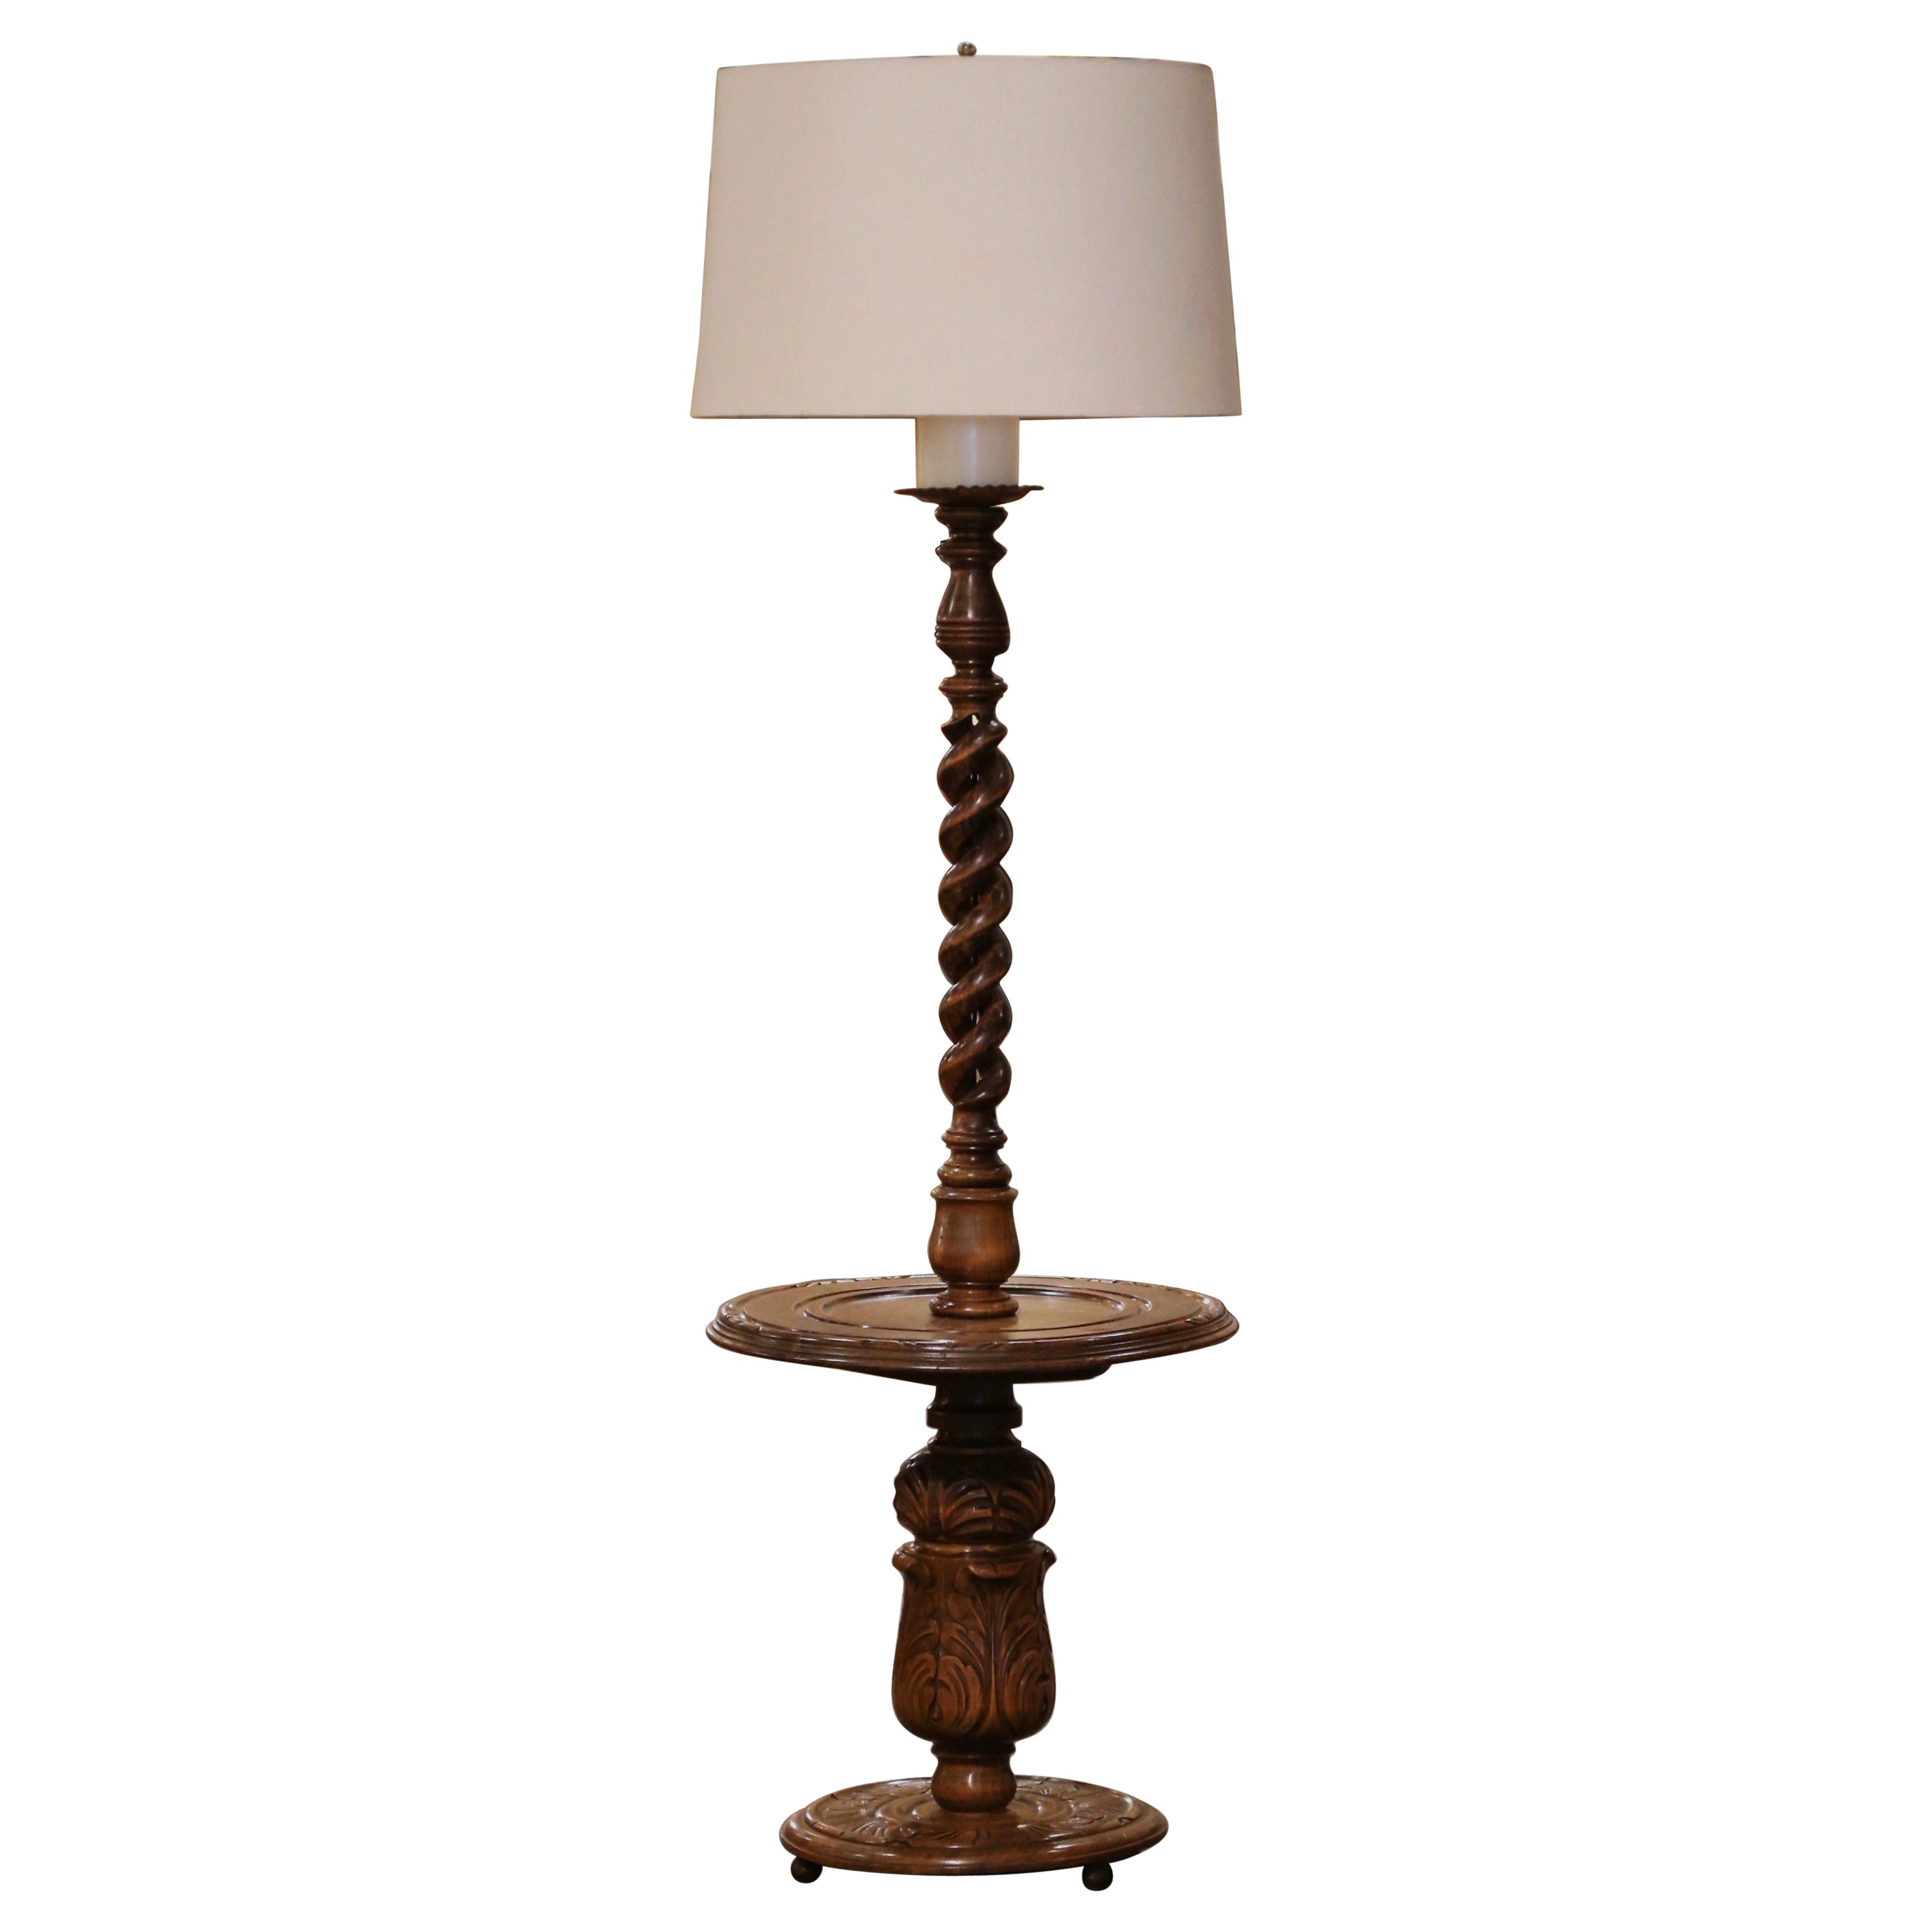 Midcentury French Carved Barley Twist Floor Lamp with Attached Table